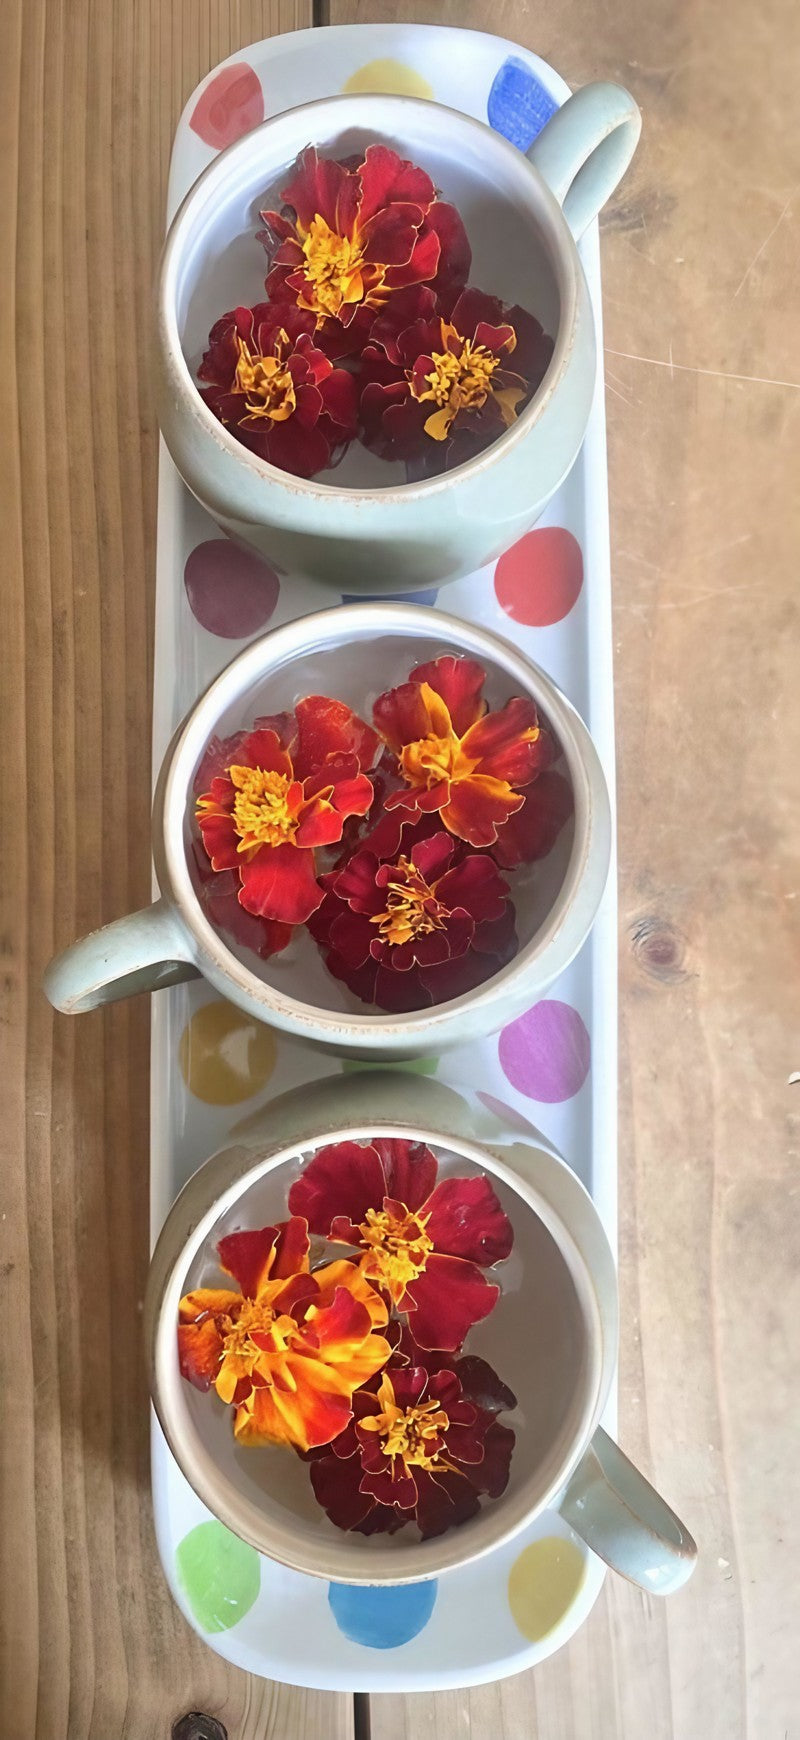 Assorted French Marigold Red Cherry flowers arranged in three bowls